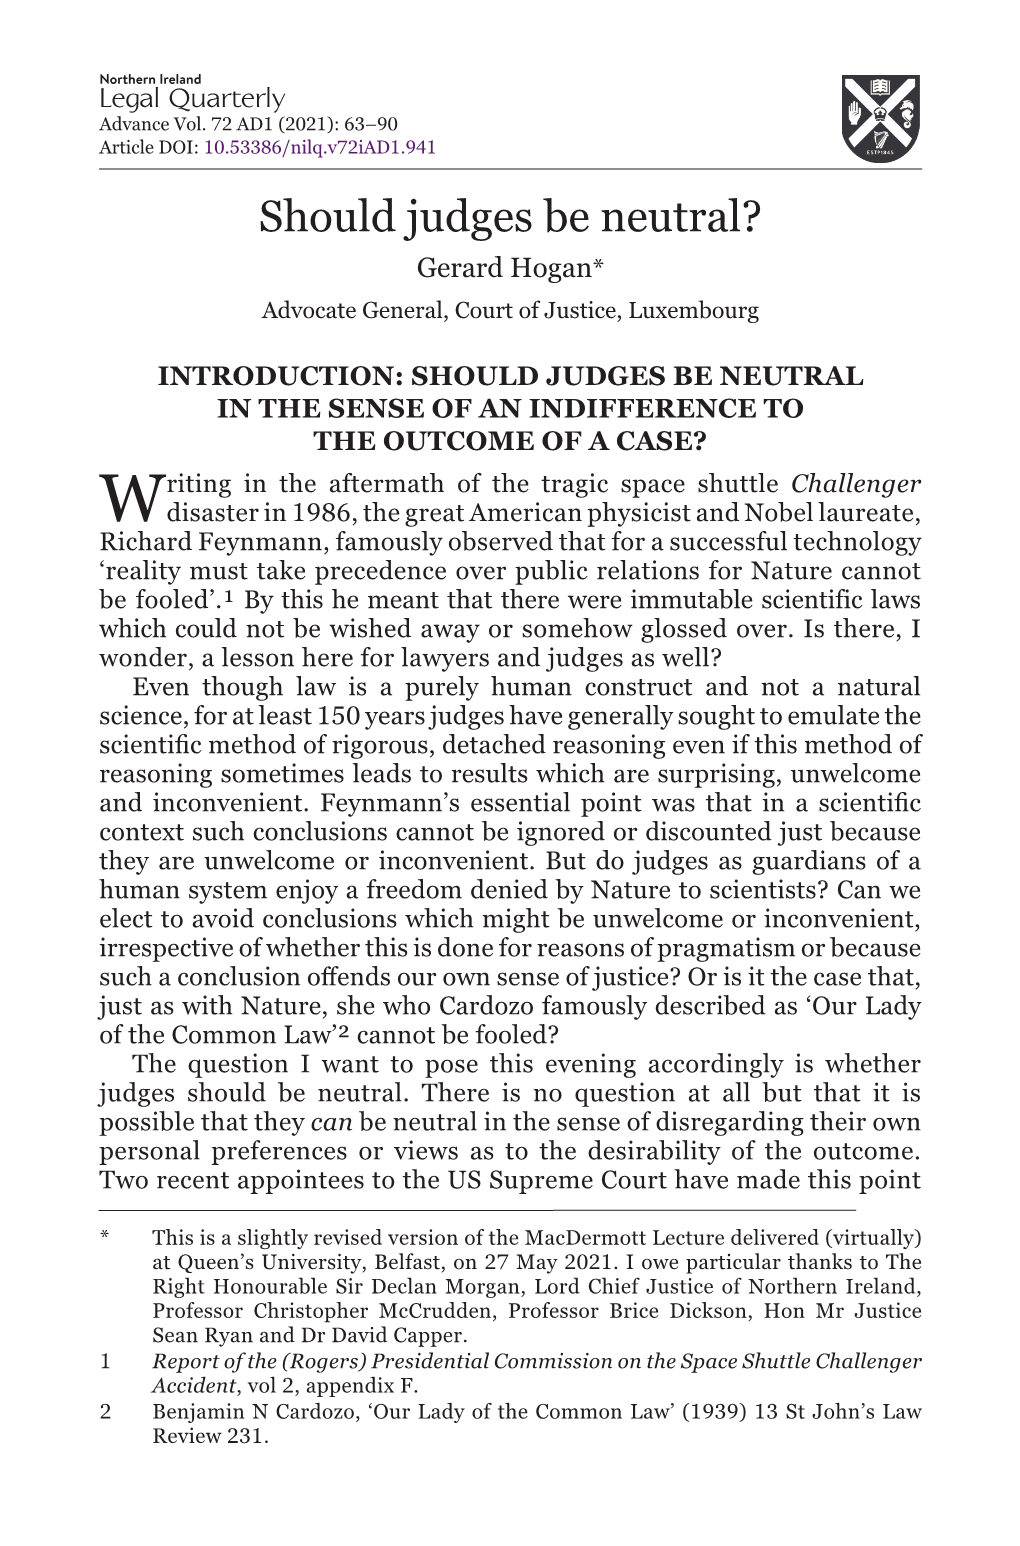 Should Judges Be Neutral? Gerard Hogan* Advocate General, Court of Justice, Luxembourg